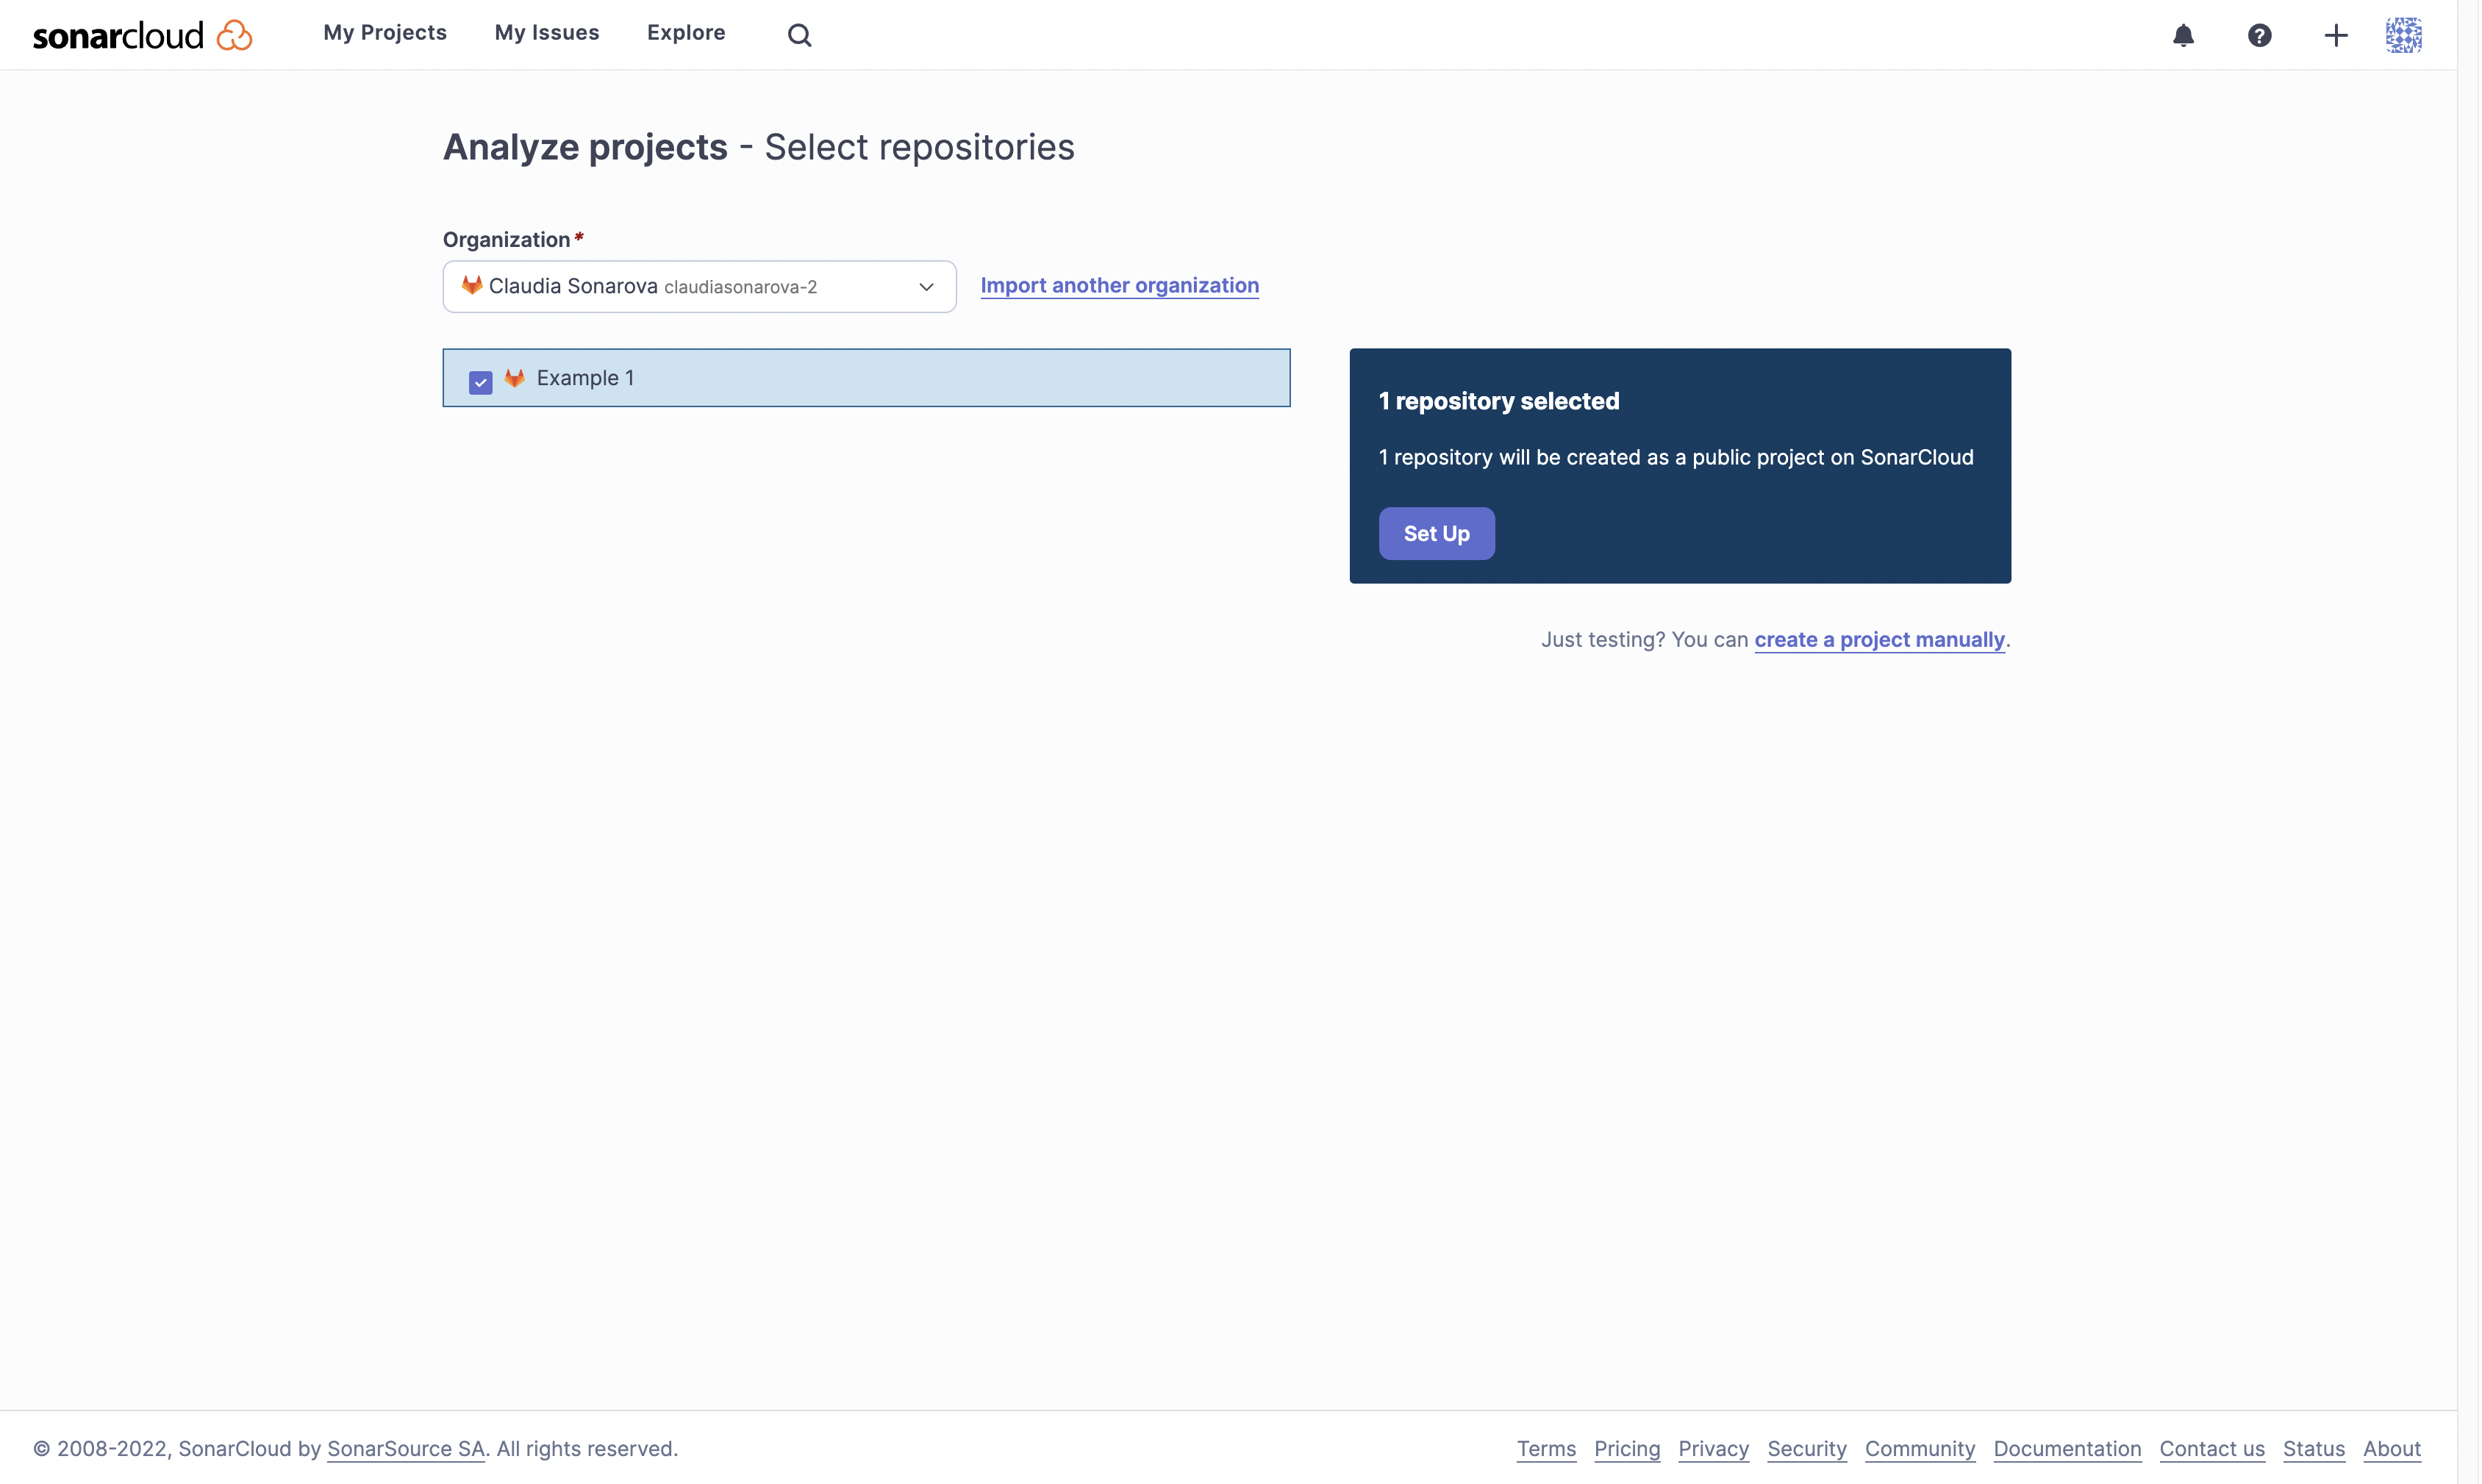 Select the GitLab repositories that you want to analyze with SonarCloud.